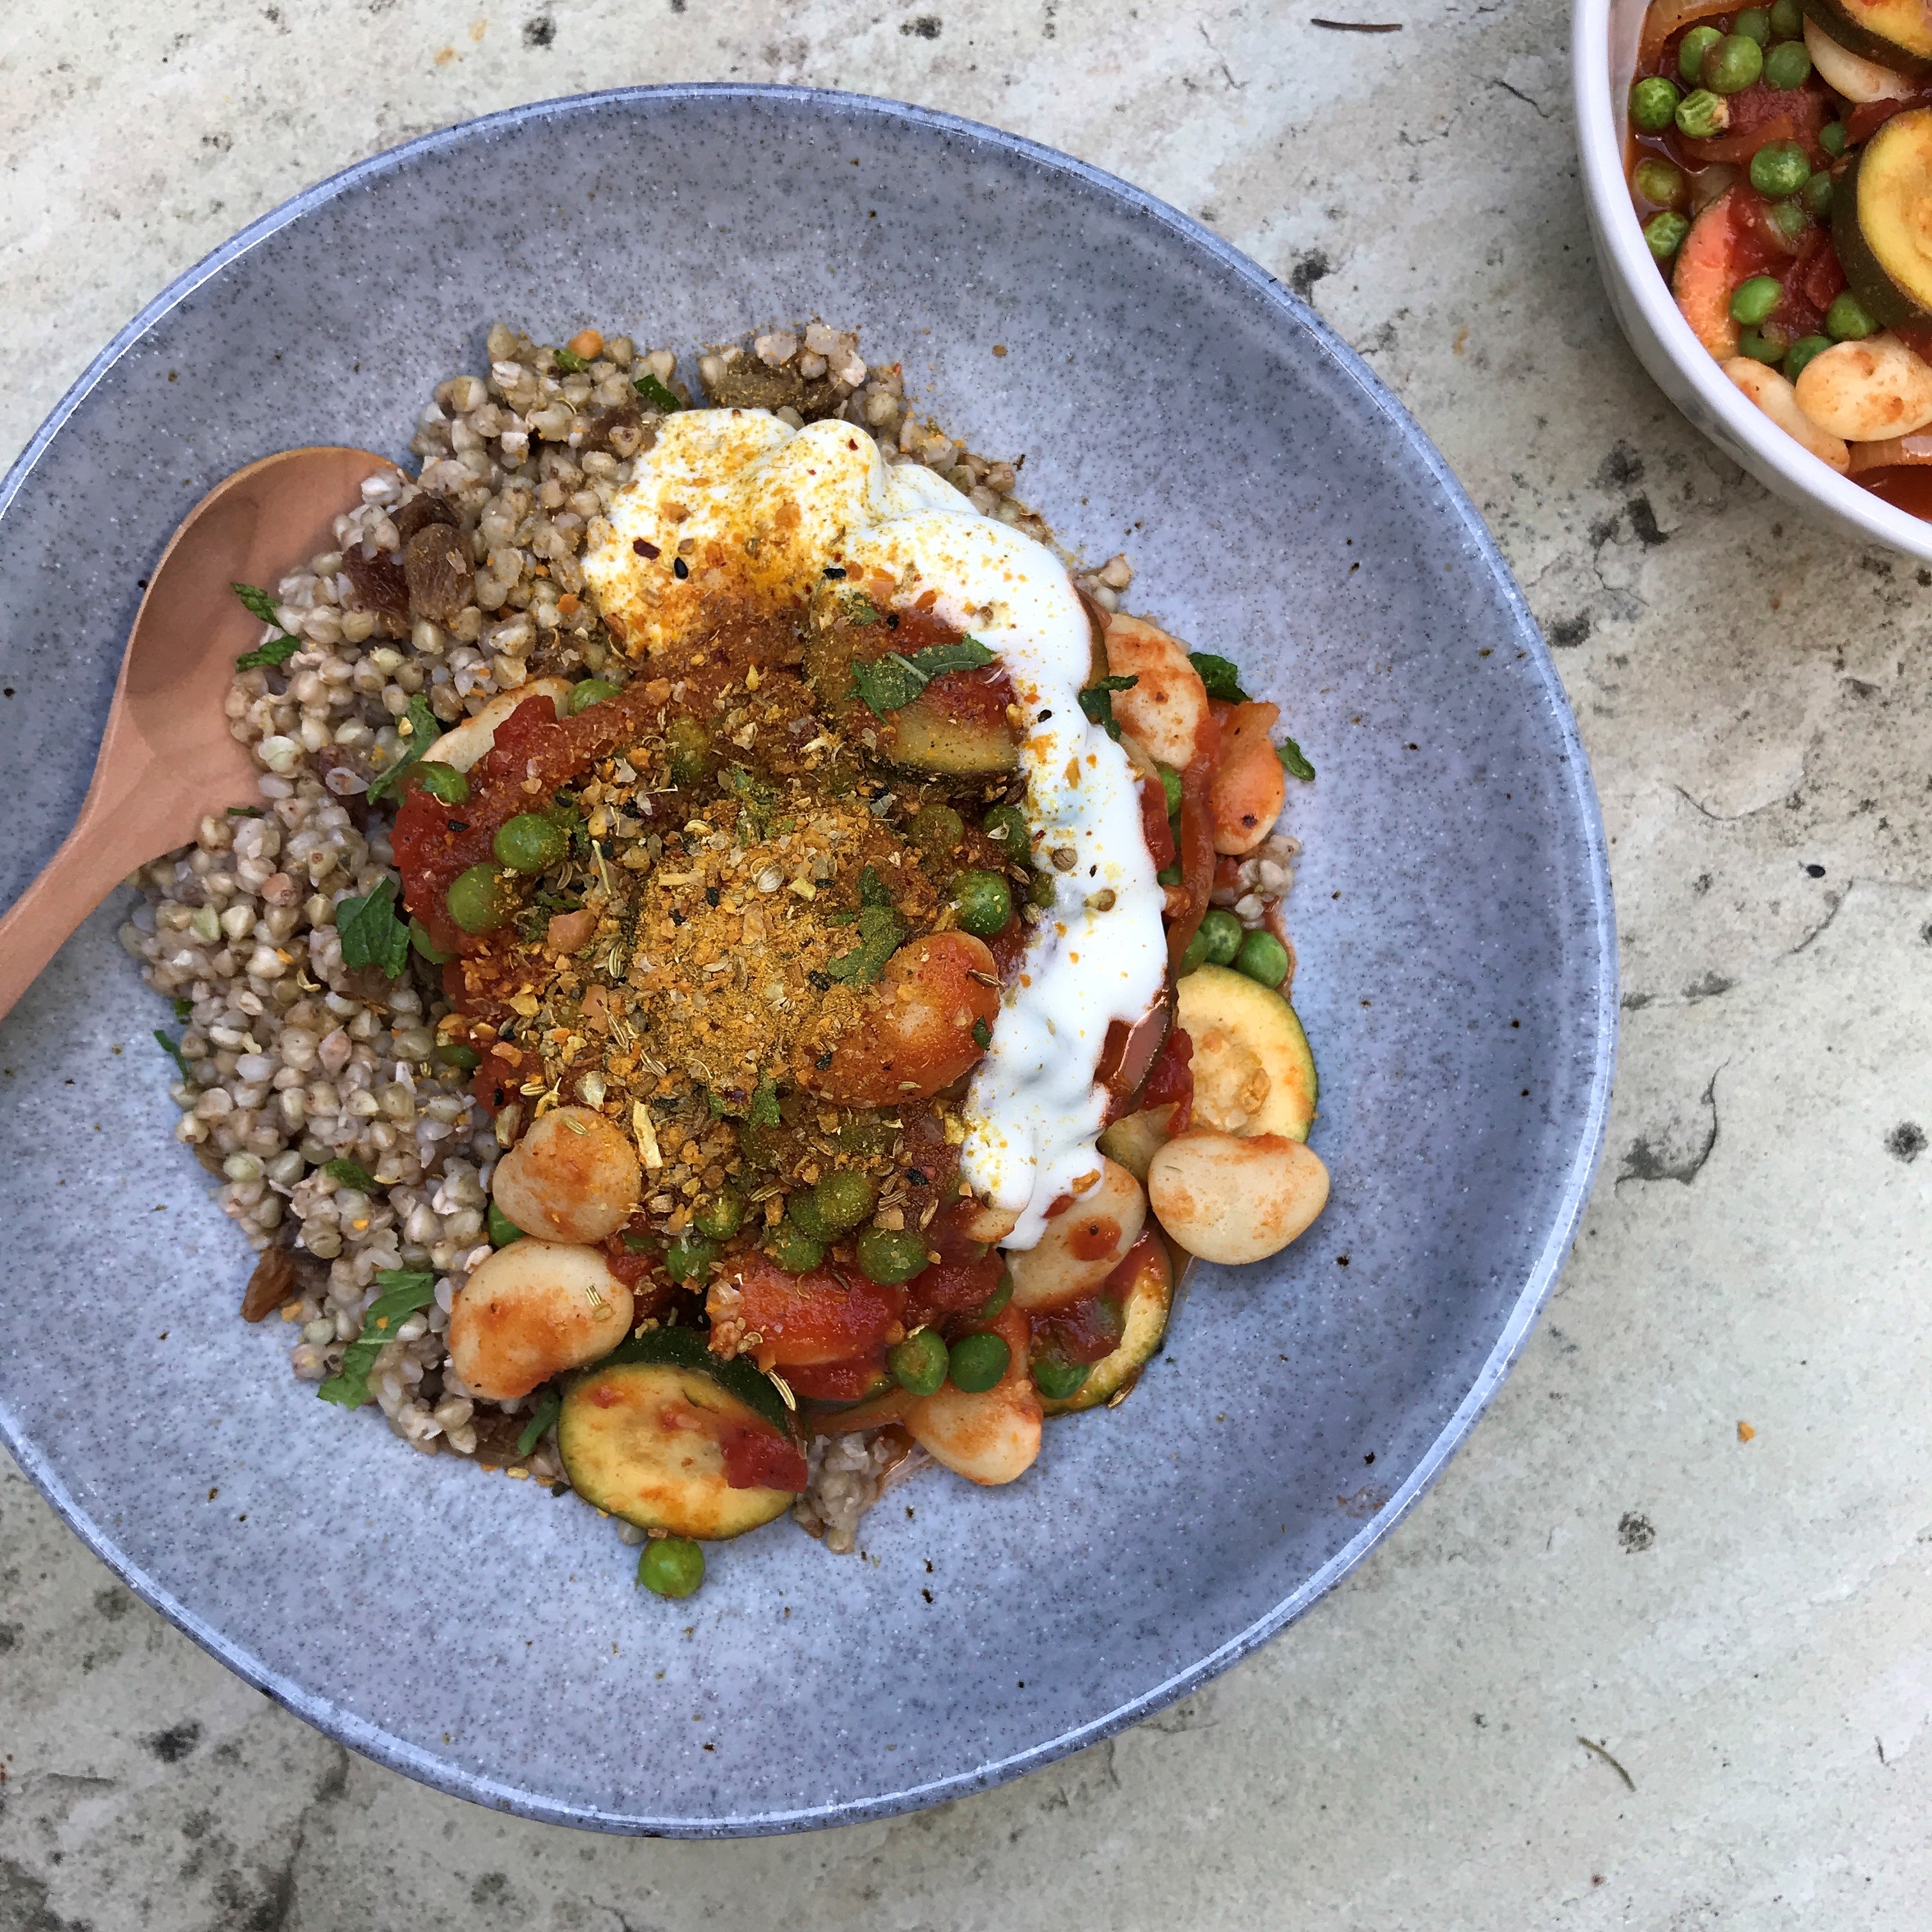 Egyptian Spiced Courgette and Butter Beans with Turmeric Dukkha